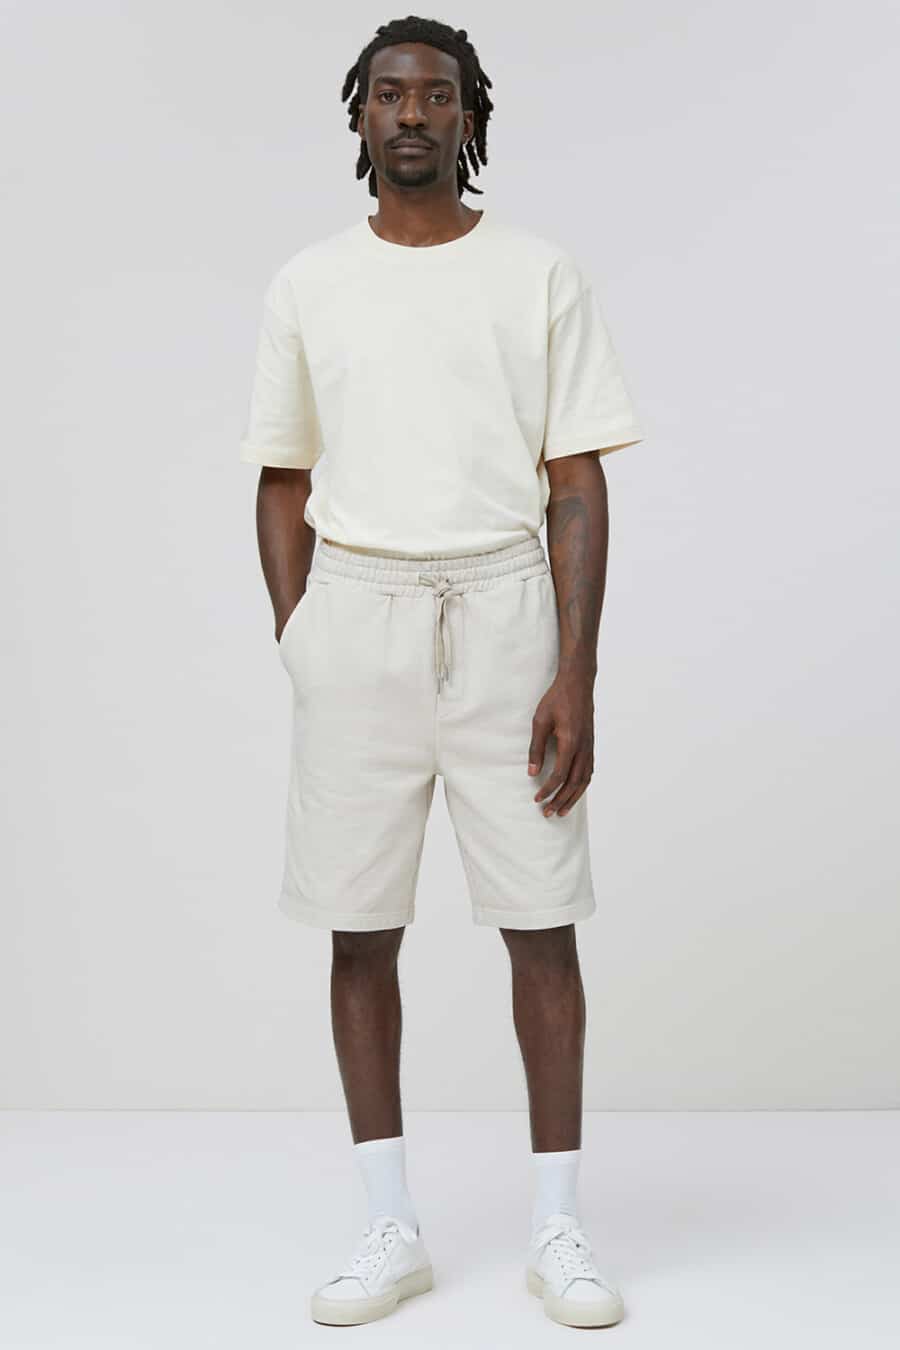 Men's off-white sweat shorts, off-white T-shirt, white tube socks and white sneakers outfit